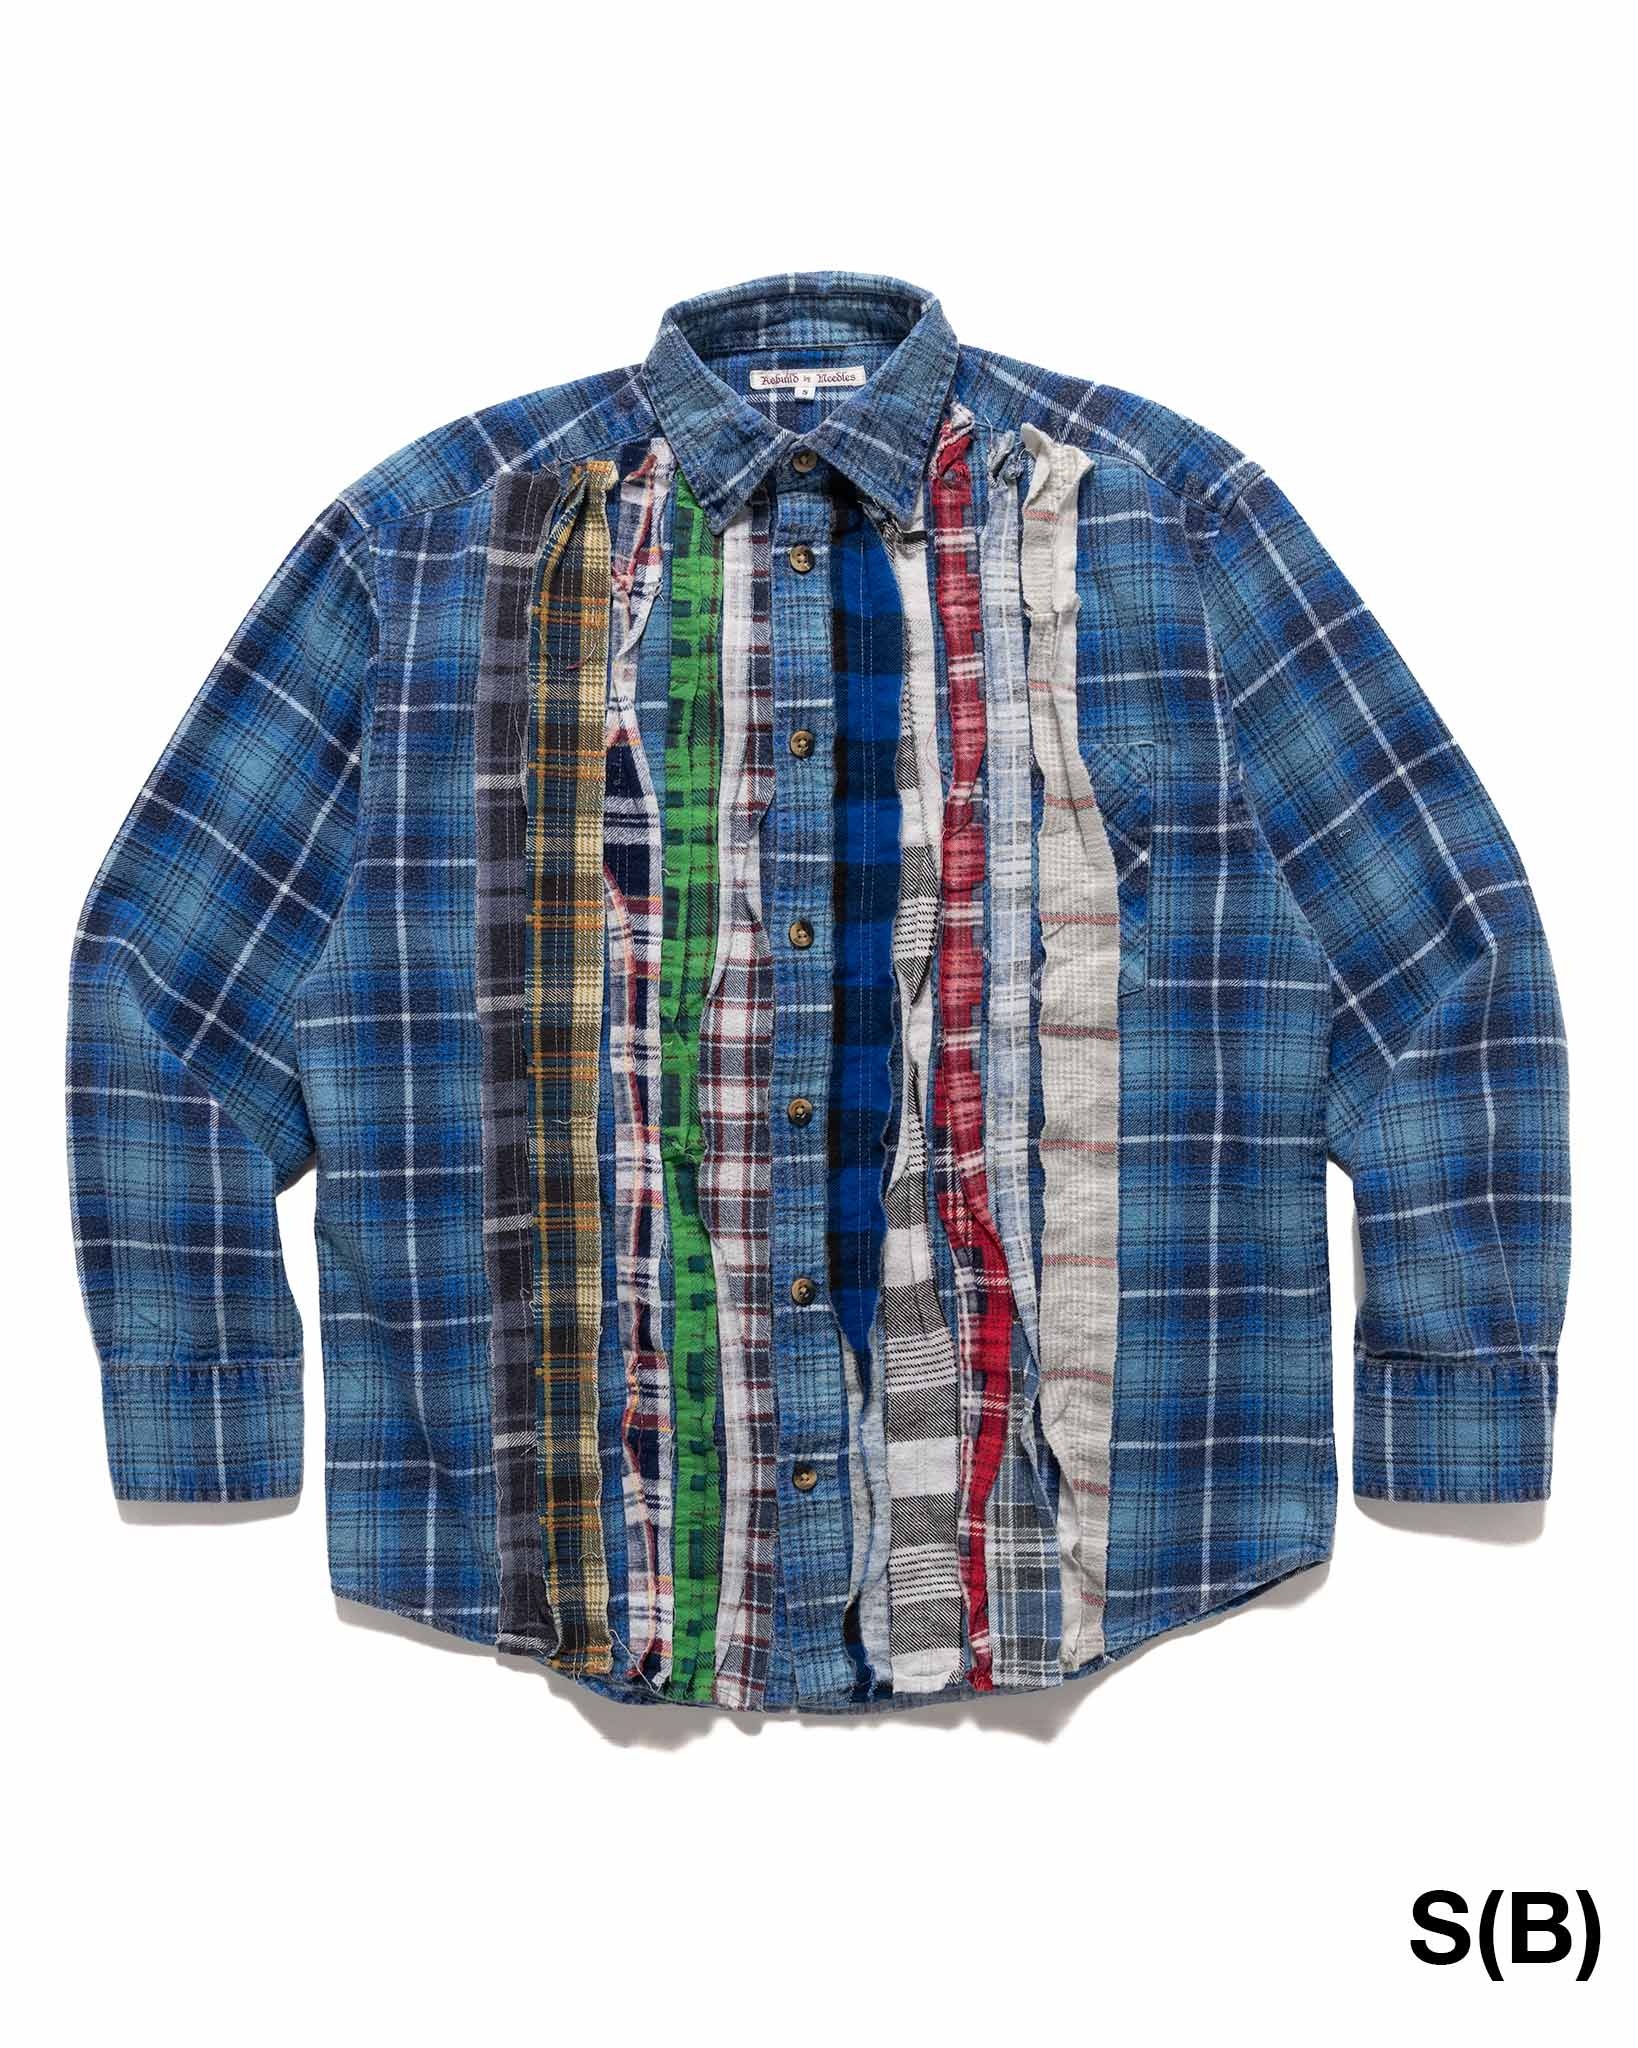 Rebuild by Needles Flannel Shirt -> Ribbon Shirt Assorted - 7